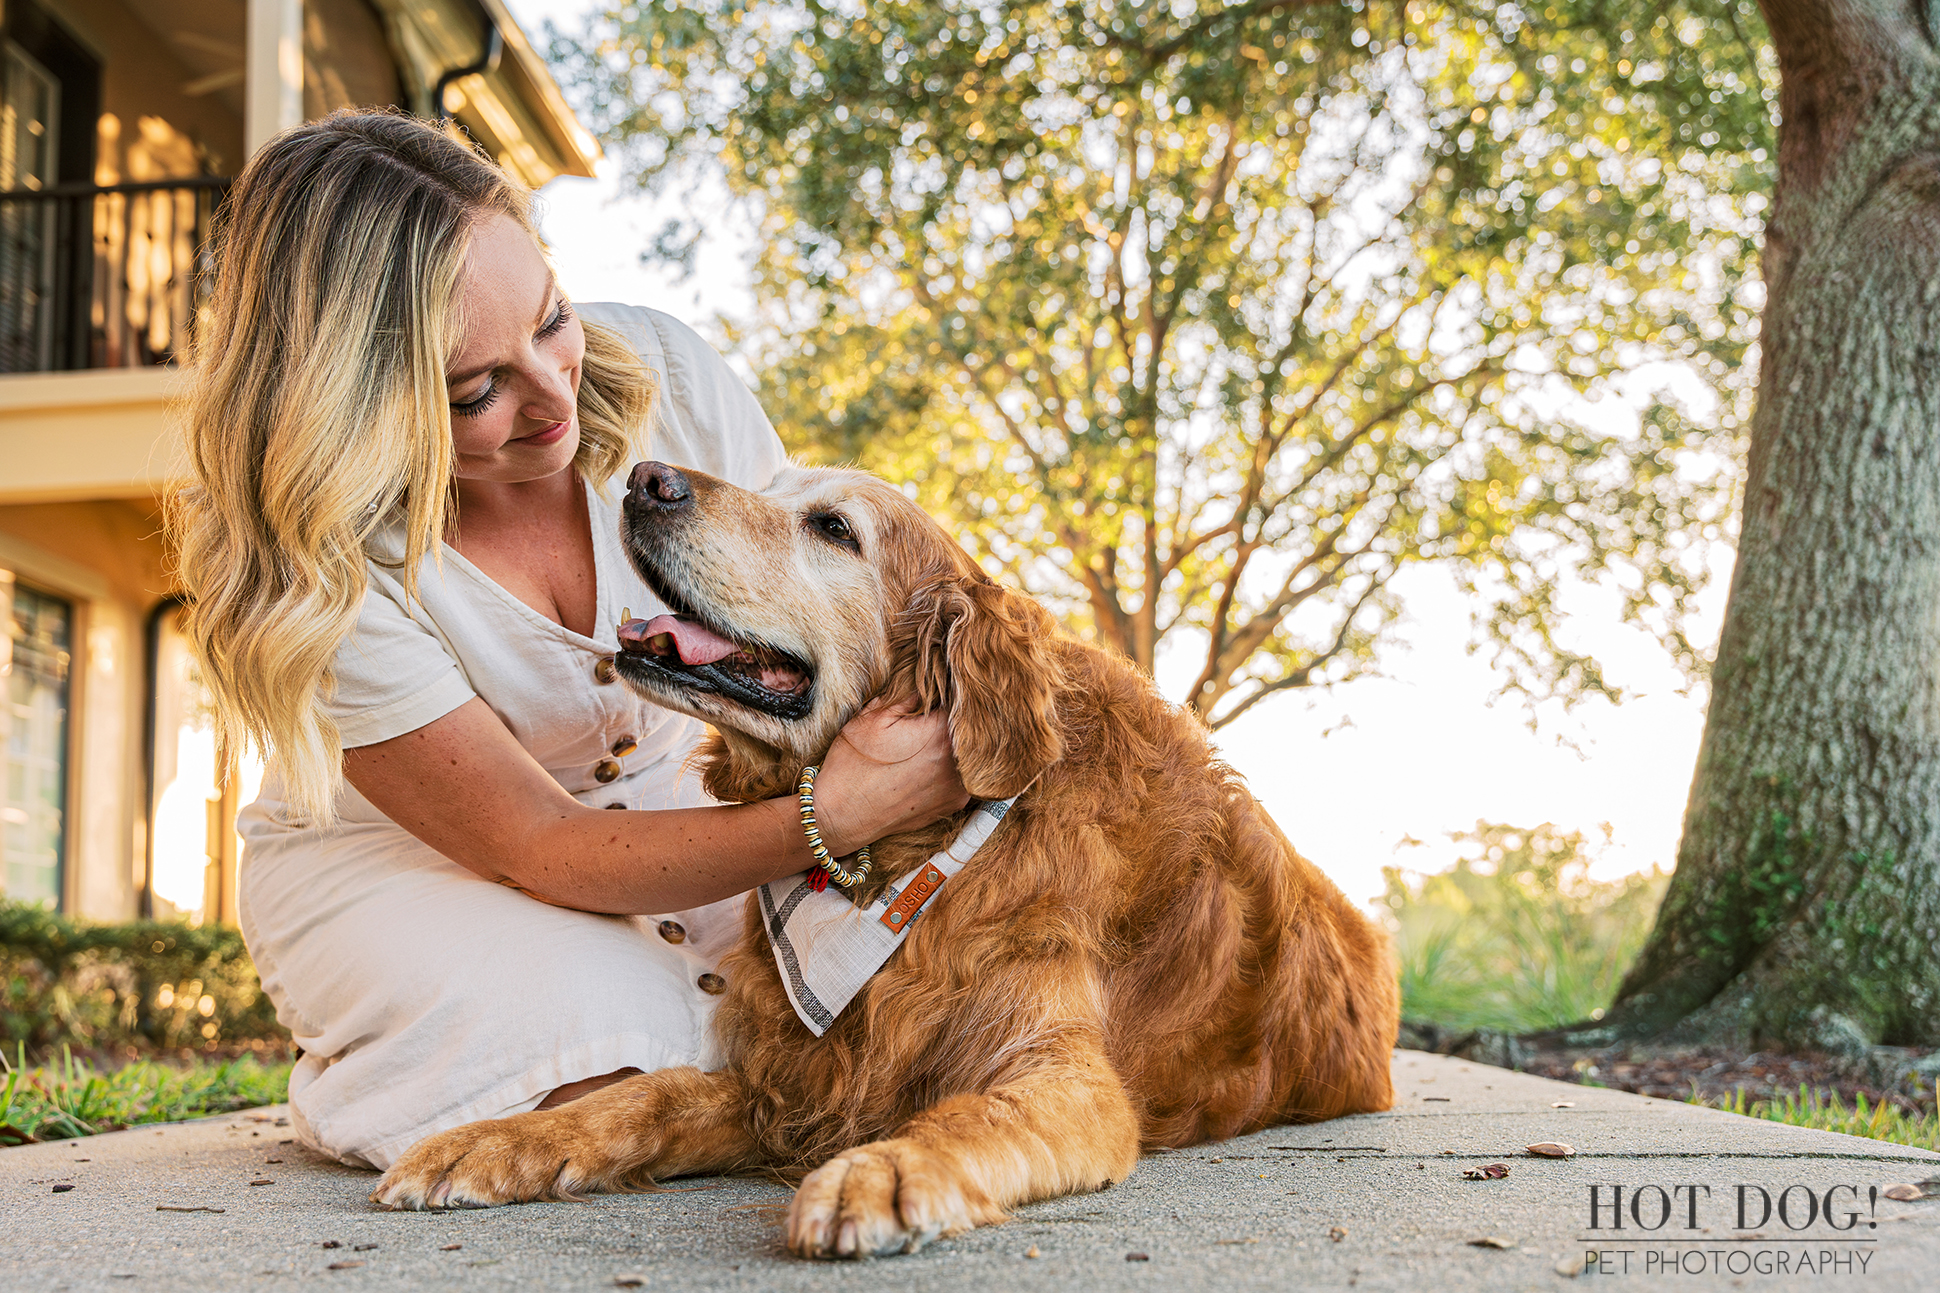 Memories in the Making: Hot Dog! Pet Photography captures the timeless bond between senior golden retriever Osho and his family in the picturesque town of Celebration, Florida.